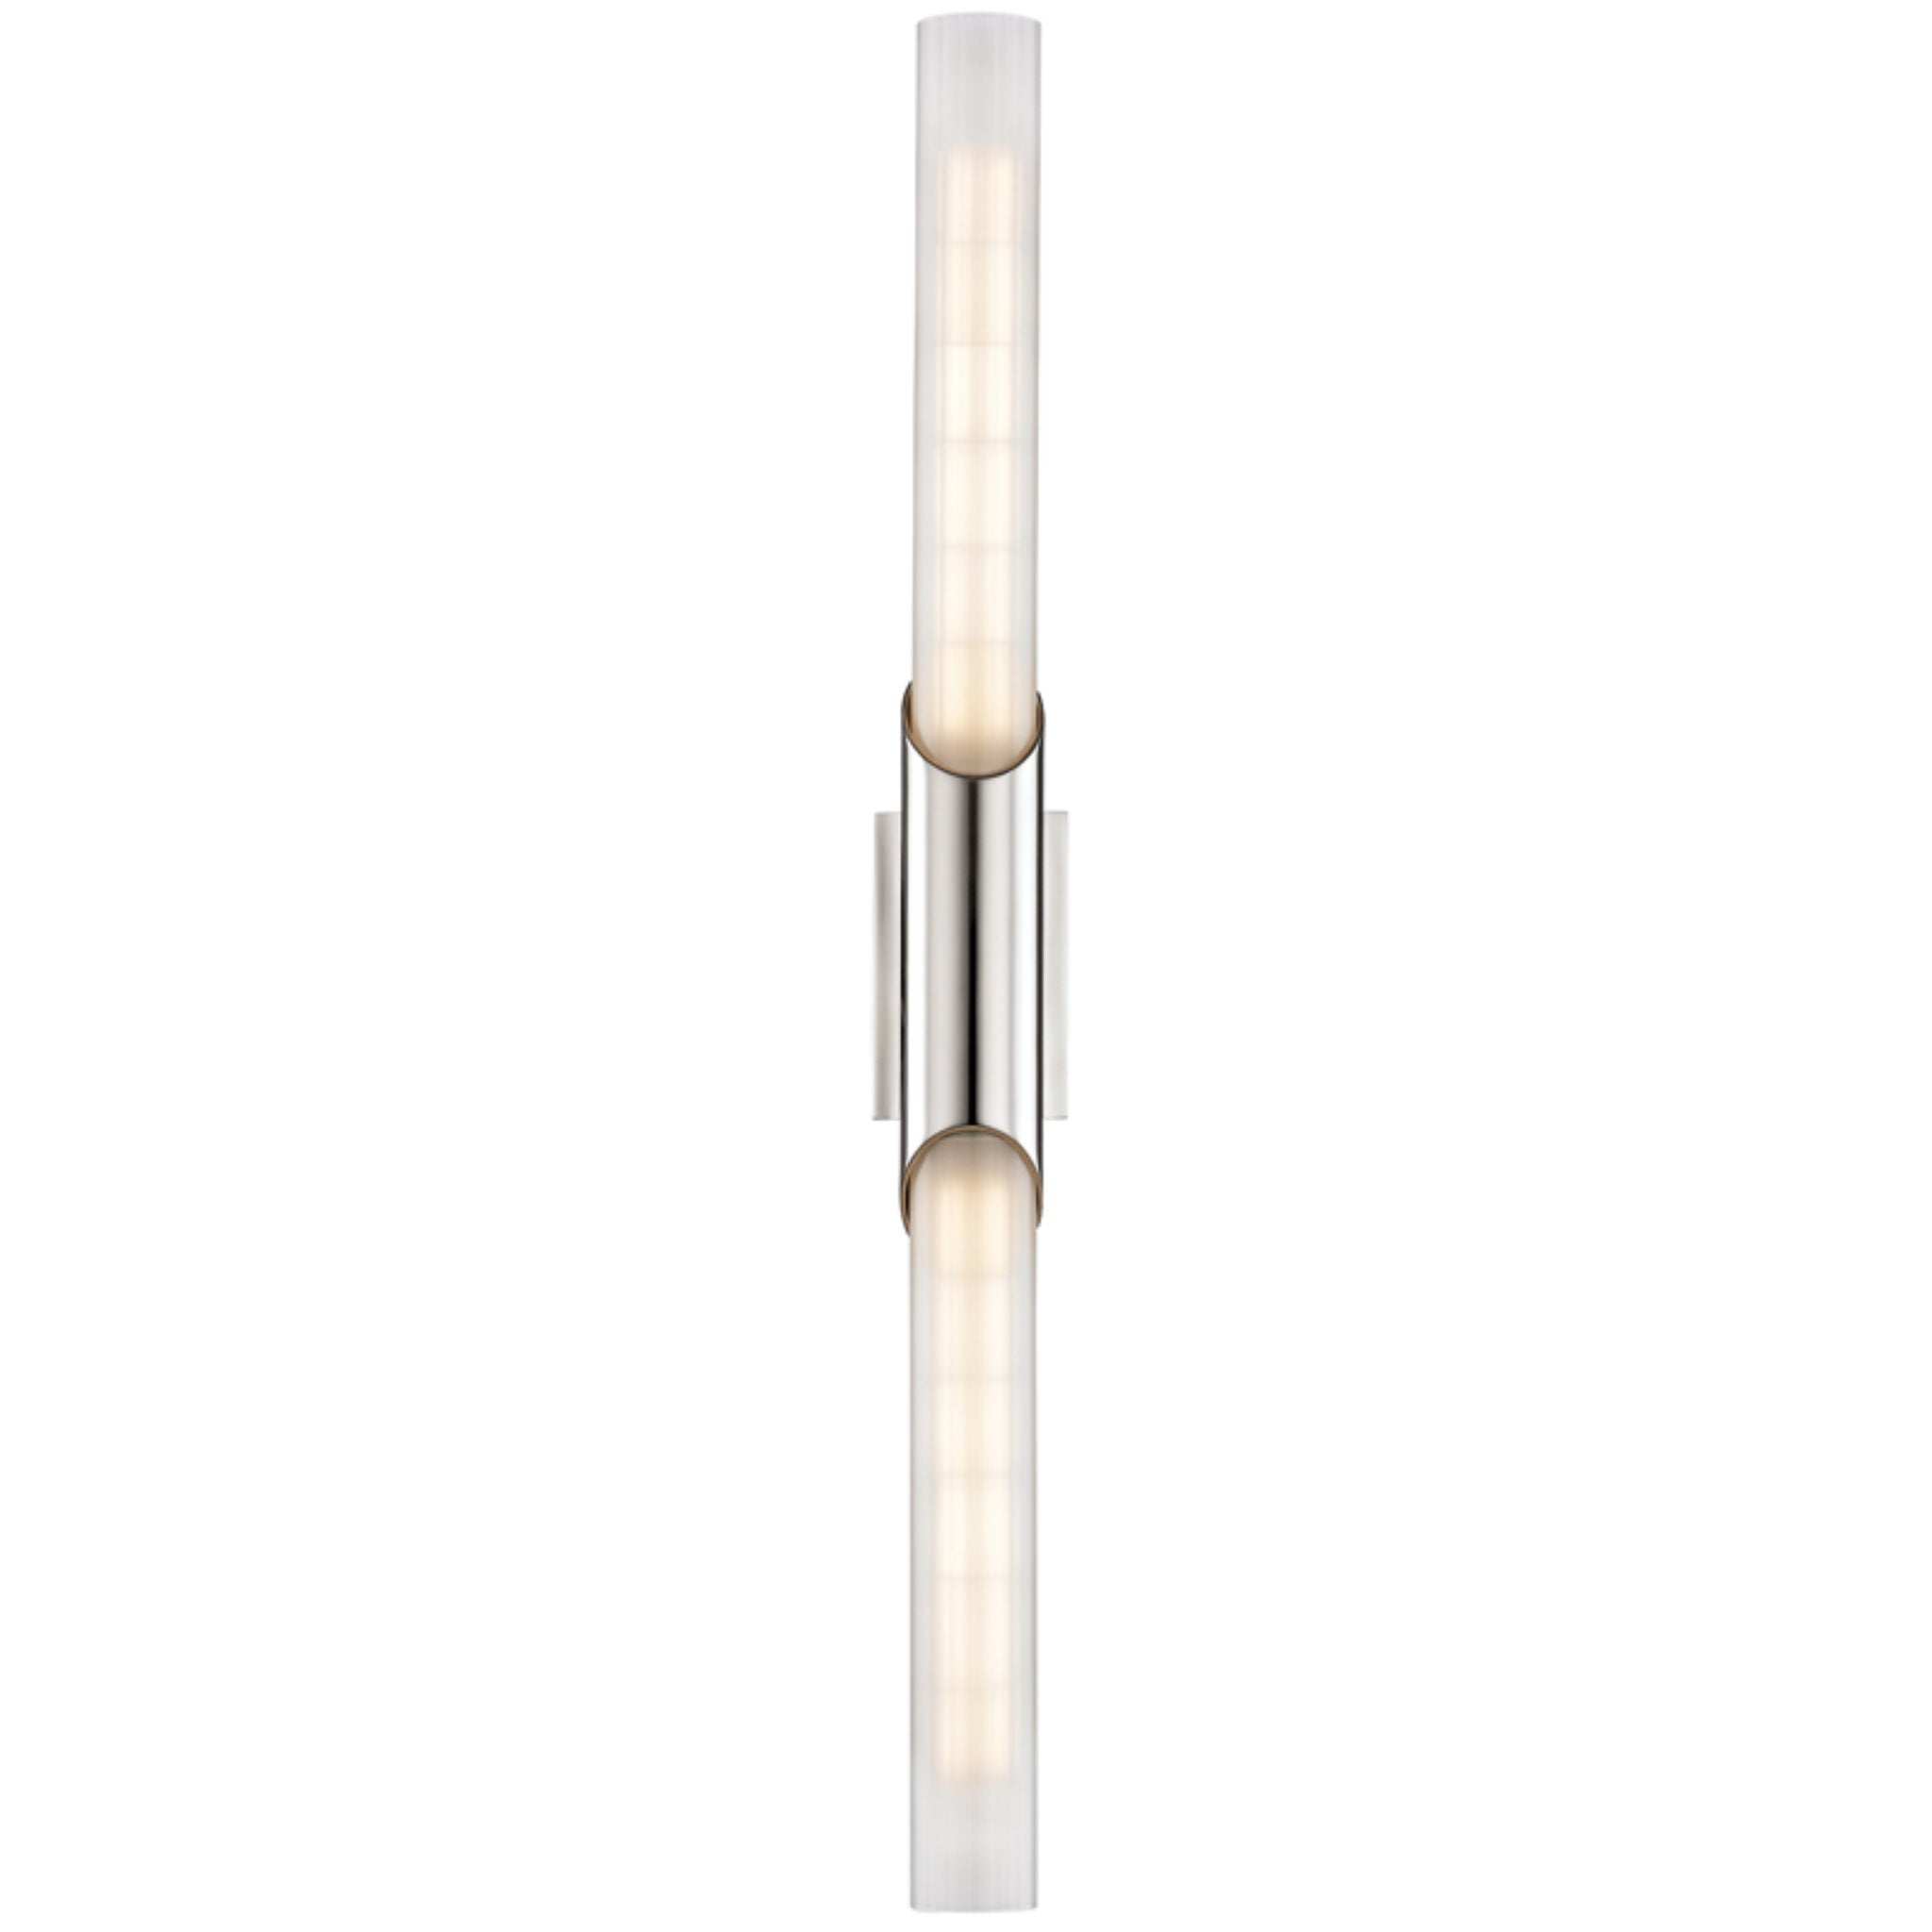 Pylon 2 Light Wall Sconce in Polished Nickel